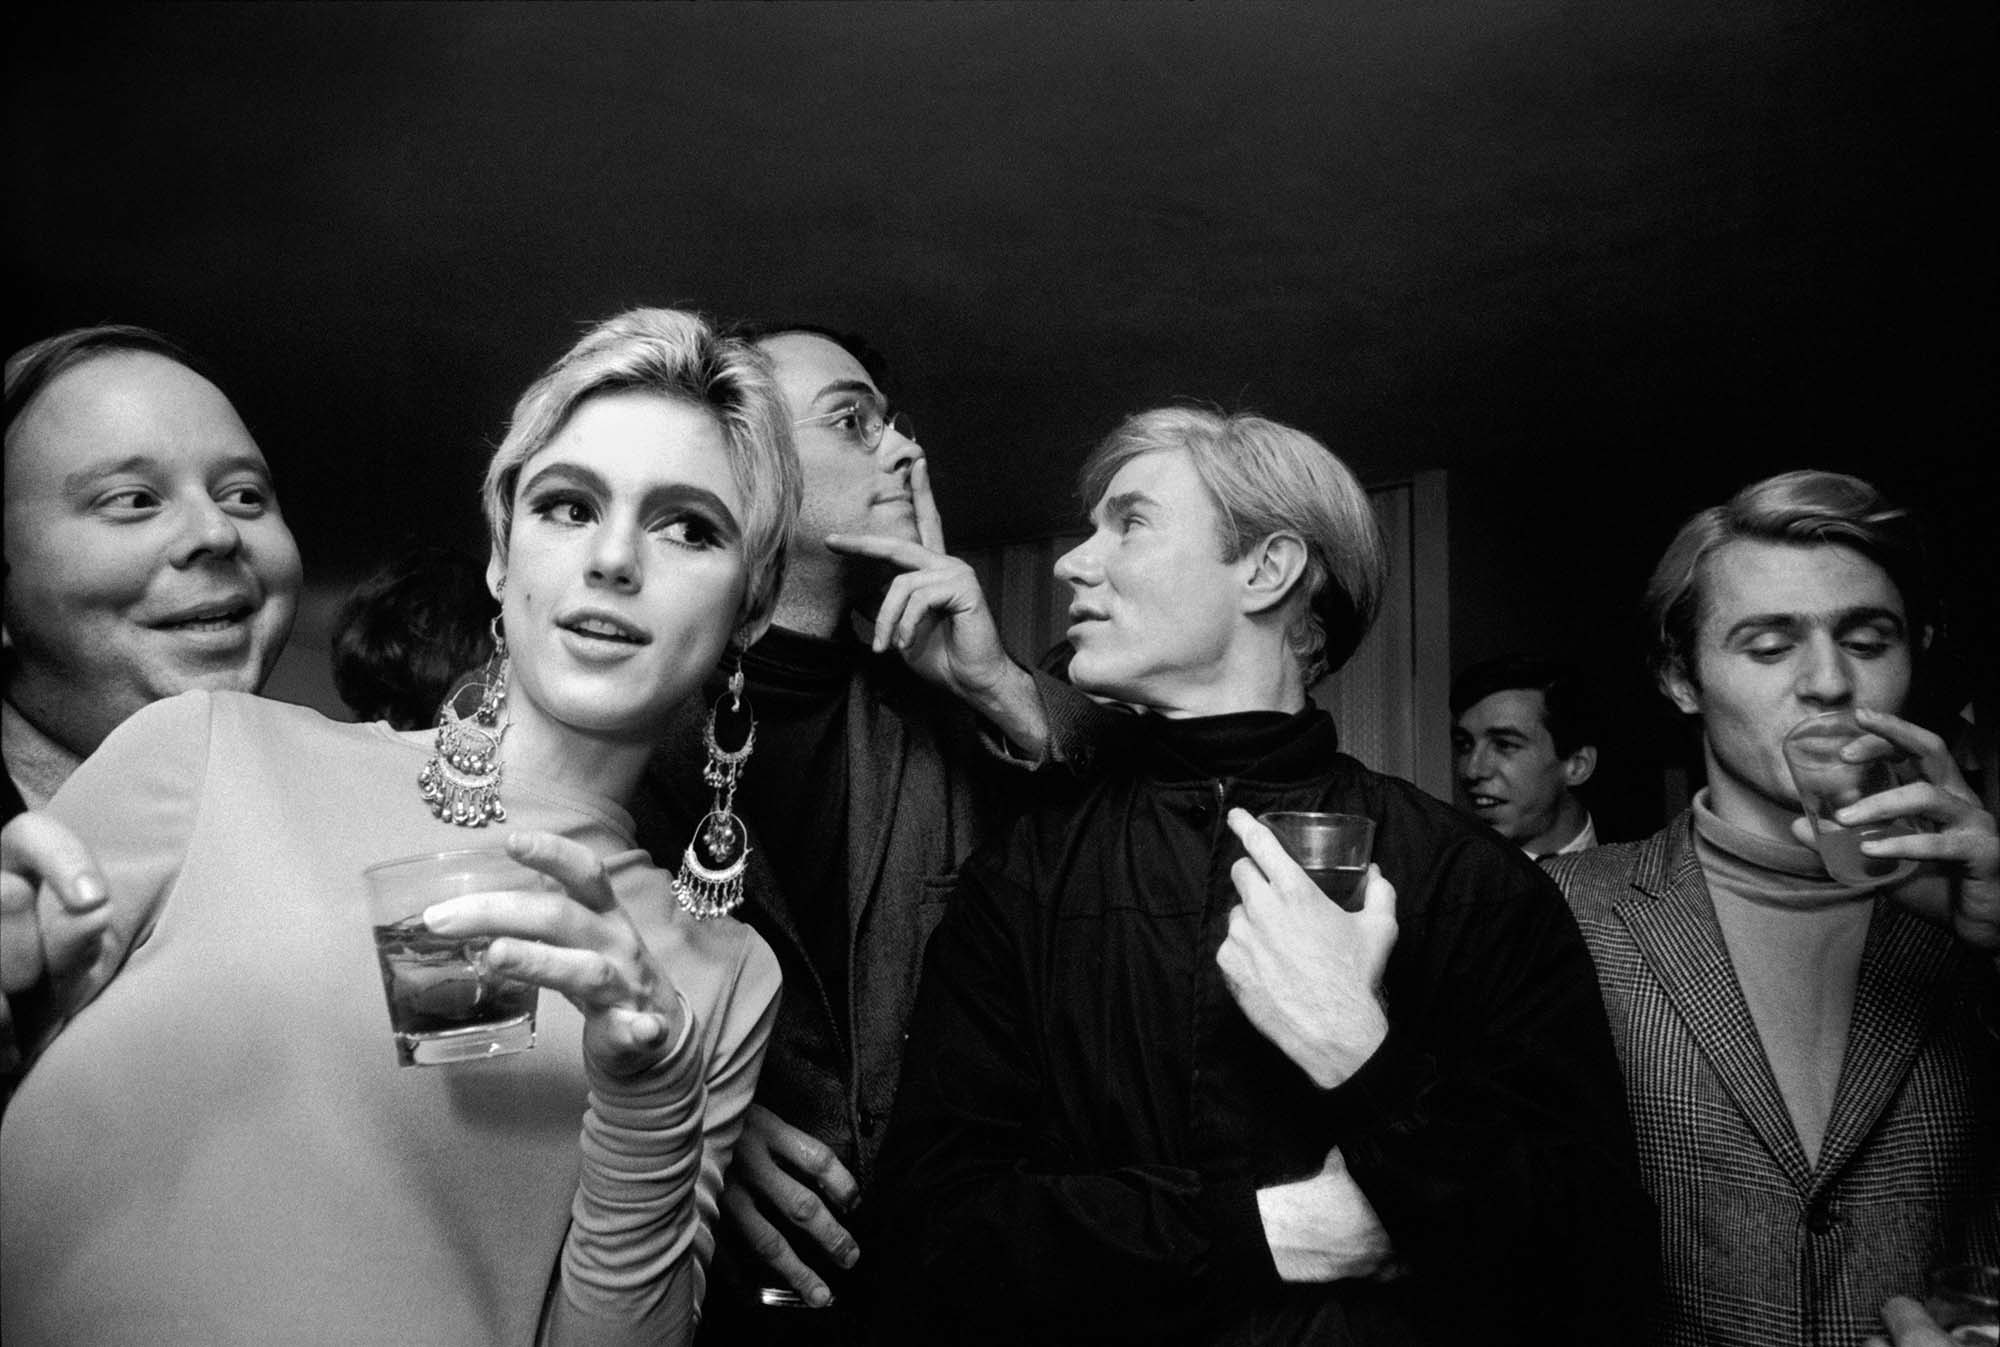 Steve Schapiro, born Brooklyn, New York, United States 1934, died Chicago, Illinois, United States 2022, <em>Edie Sedgwick, Andy Warhol, and others at a party,</em> 1965, New York, gelatin-silver photograph, 31.5 x 47.1 cm (image), 40.0 x 49.9 cm (sheet); Courtesy of Fahey/Klein Gallery, © estate of Steve Schapiro